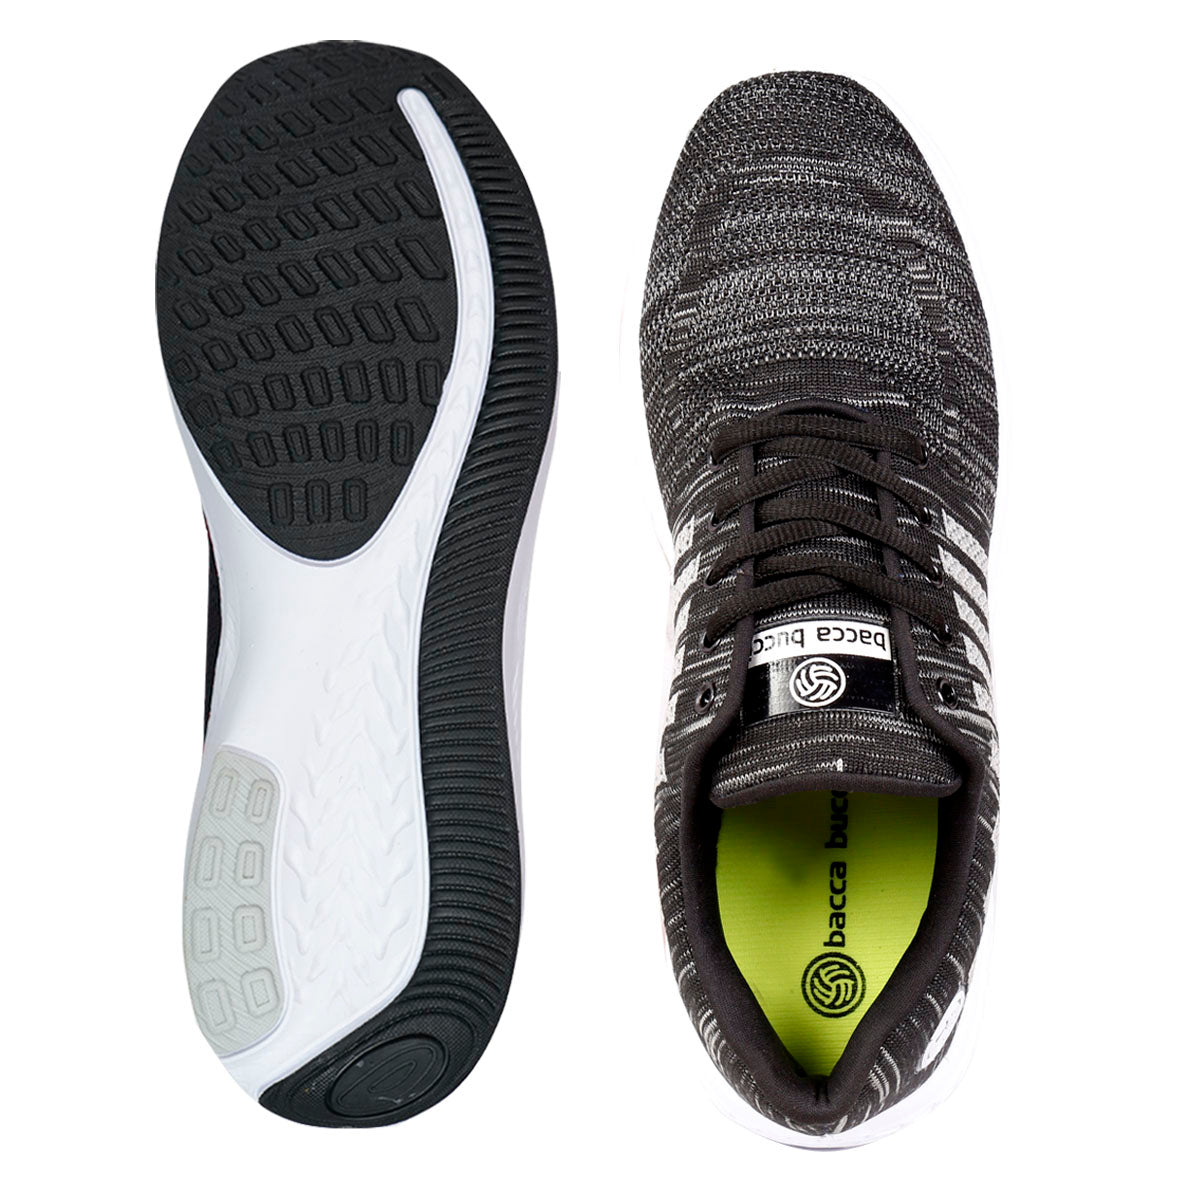 Bacca Bucci PROJECT PLUS Running Walking Training Gym Shoes Specially developed for wide and Large Foots | Only Big Sizes Available | UK-11 to 15